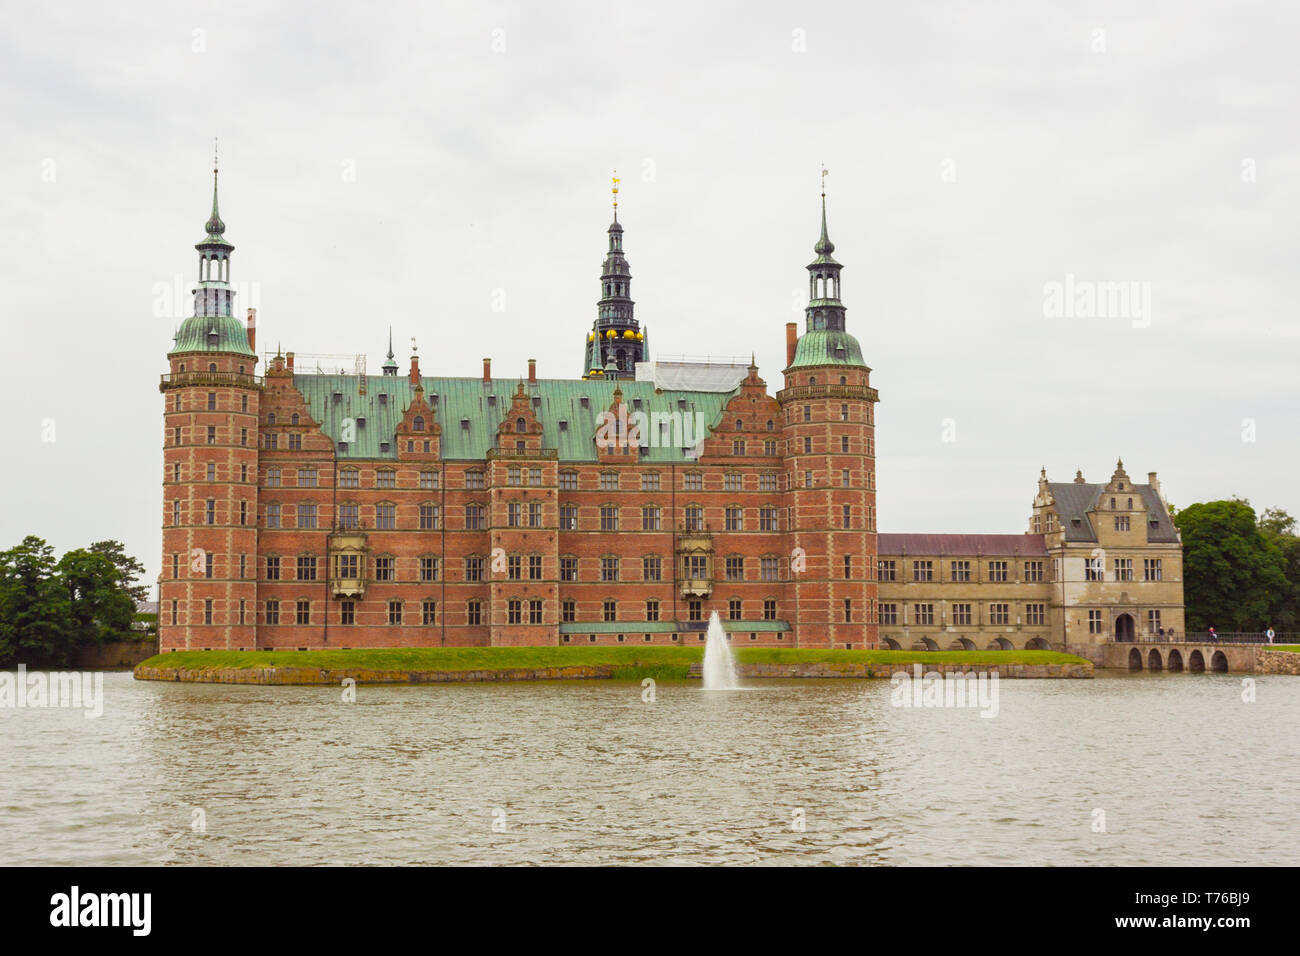 Beautiful view of Fredensborg palace in Hilleroed, Denmark. Was shot from public park. Frederiksborg palace and fountain in the palace lake, Hillerod, Stock Photo